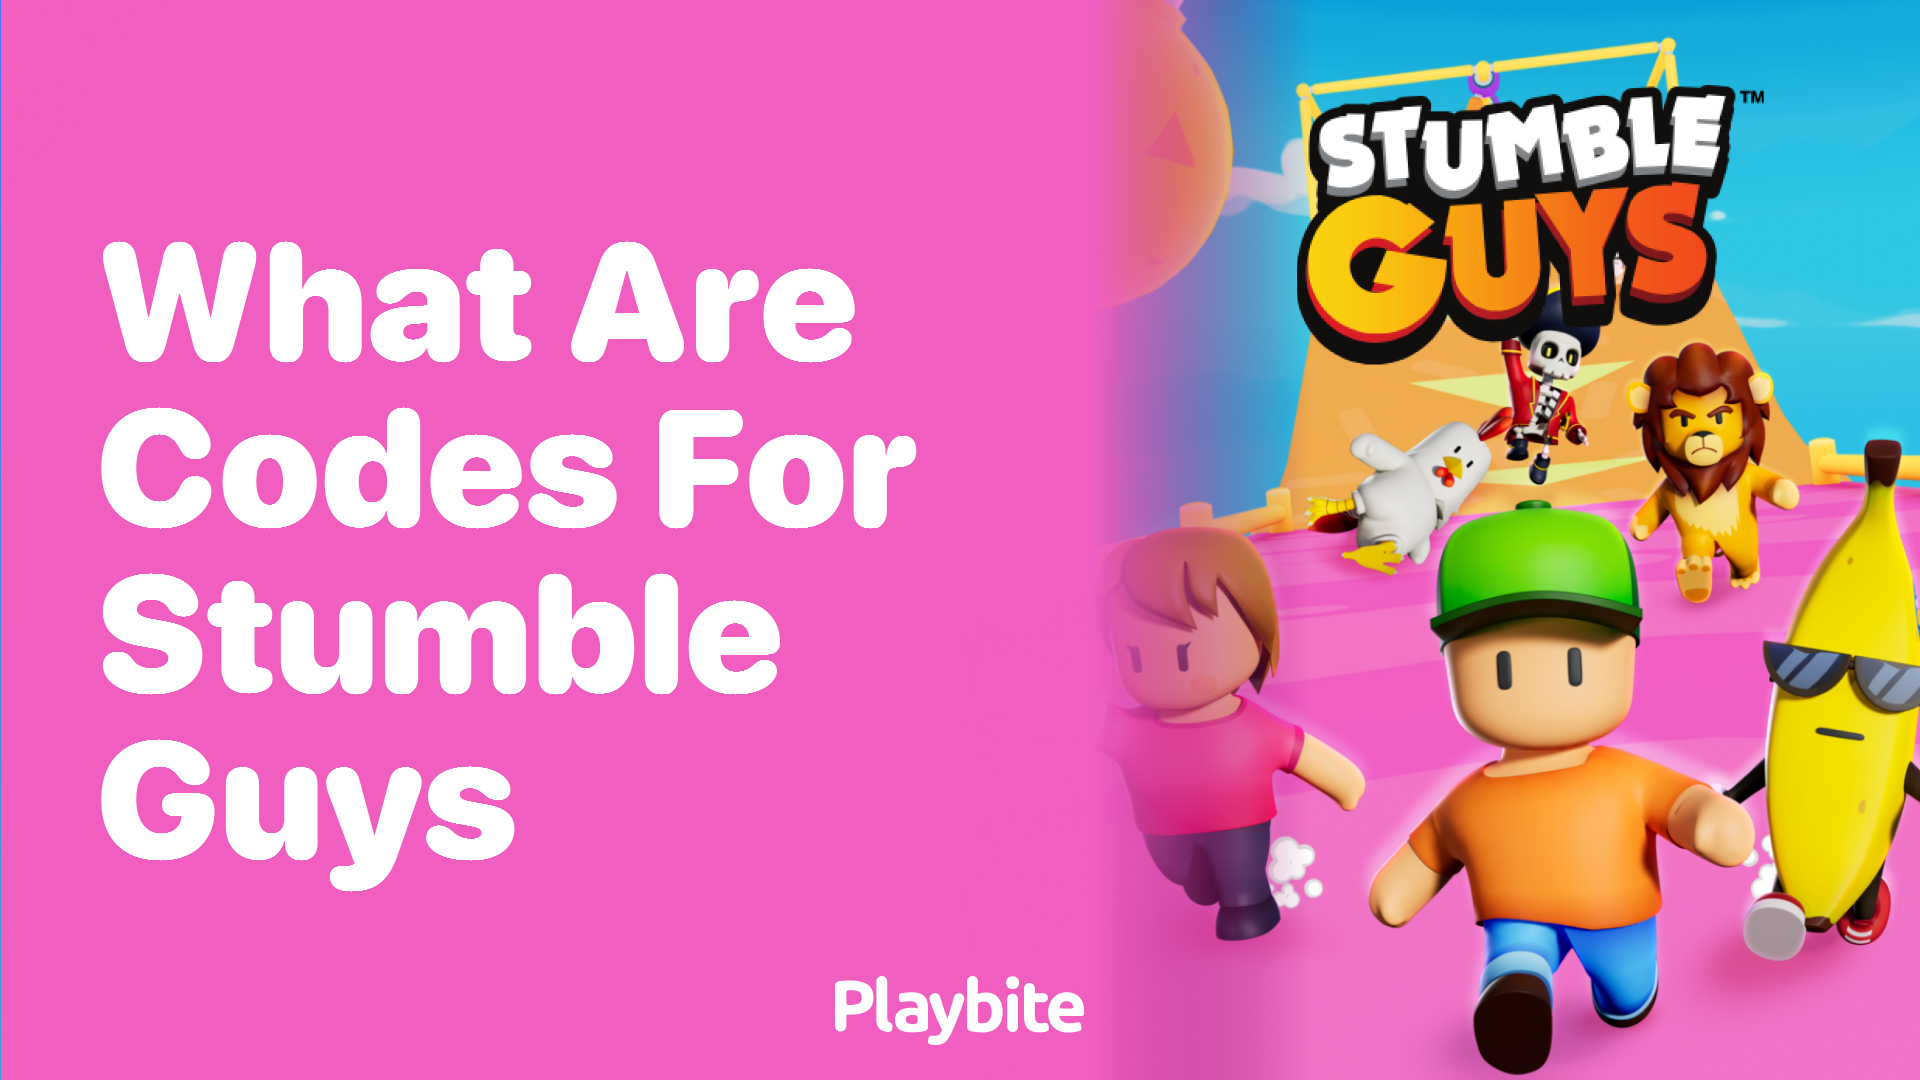 What Are Codes for Stumble Guys?